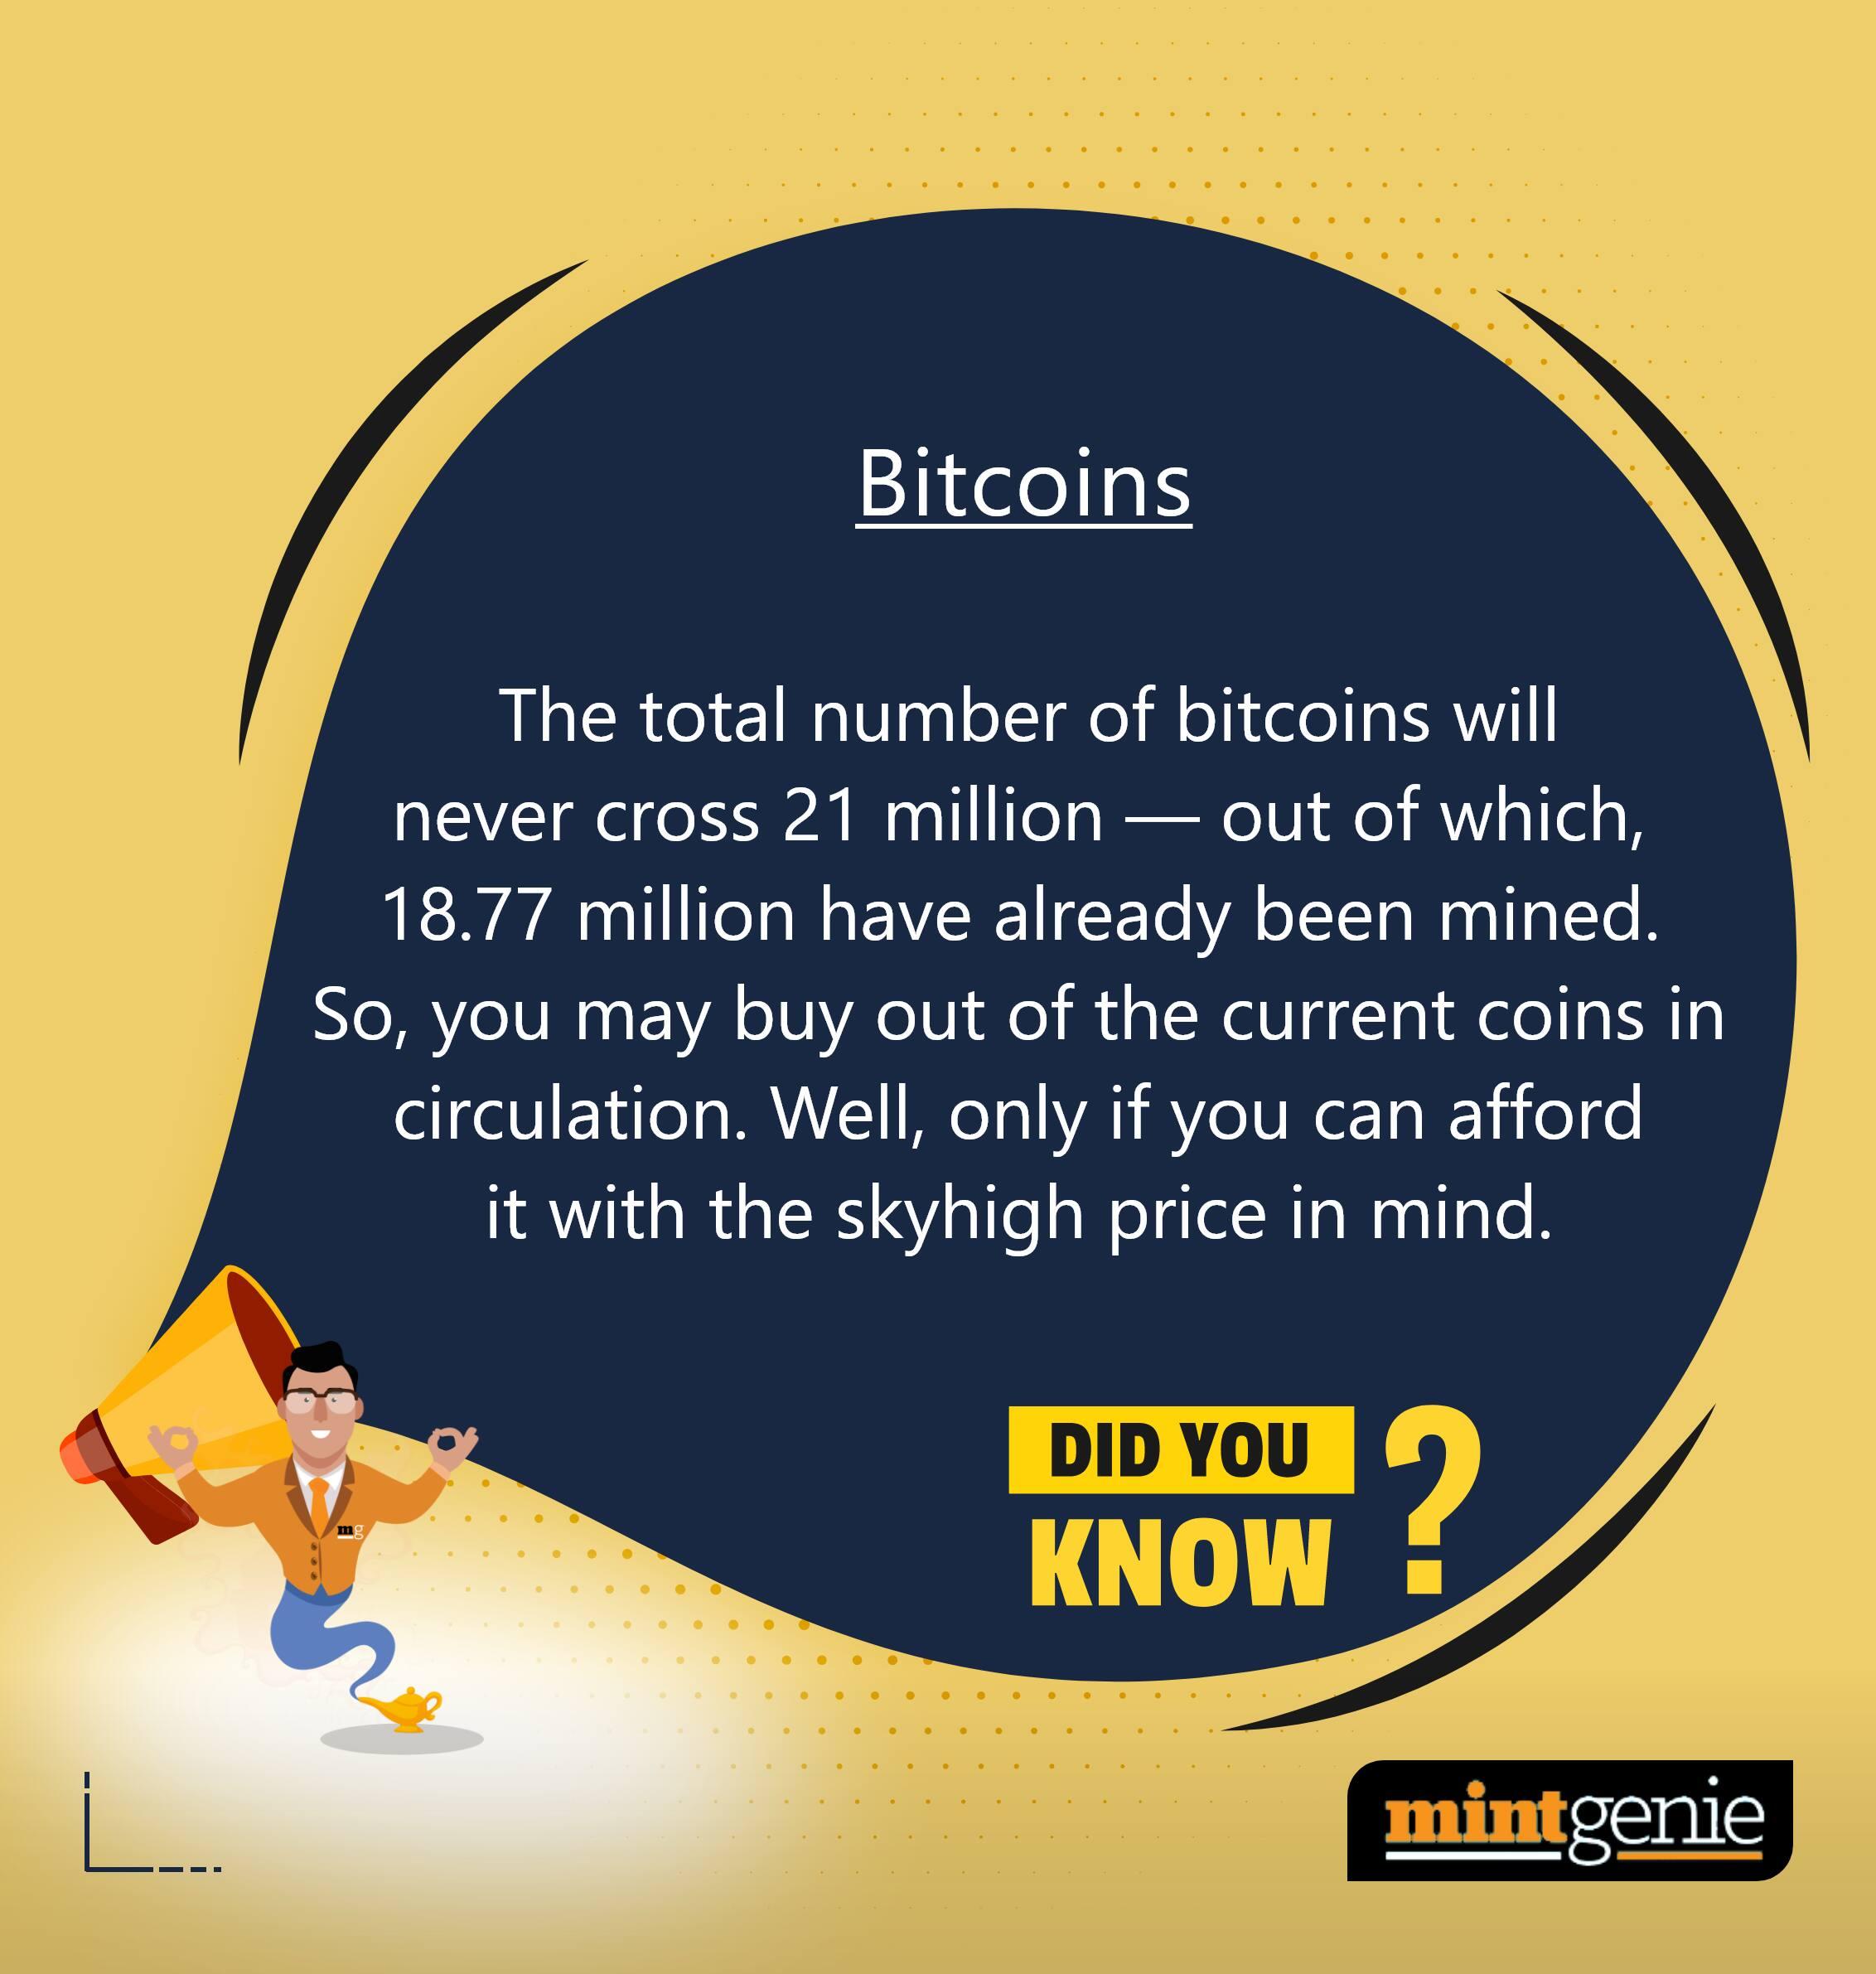 The total number of bitcoins has been capped at 21 million.